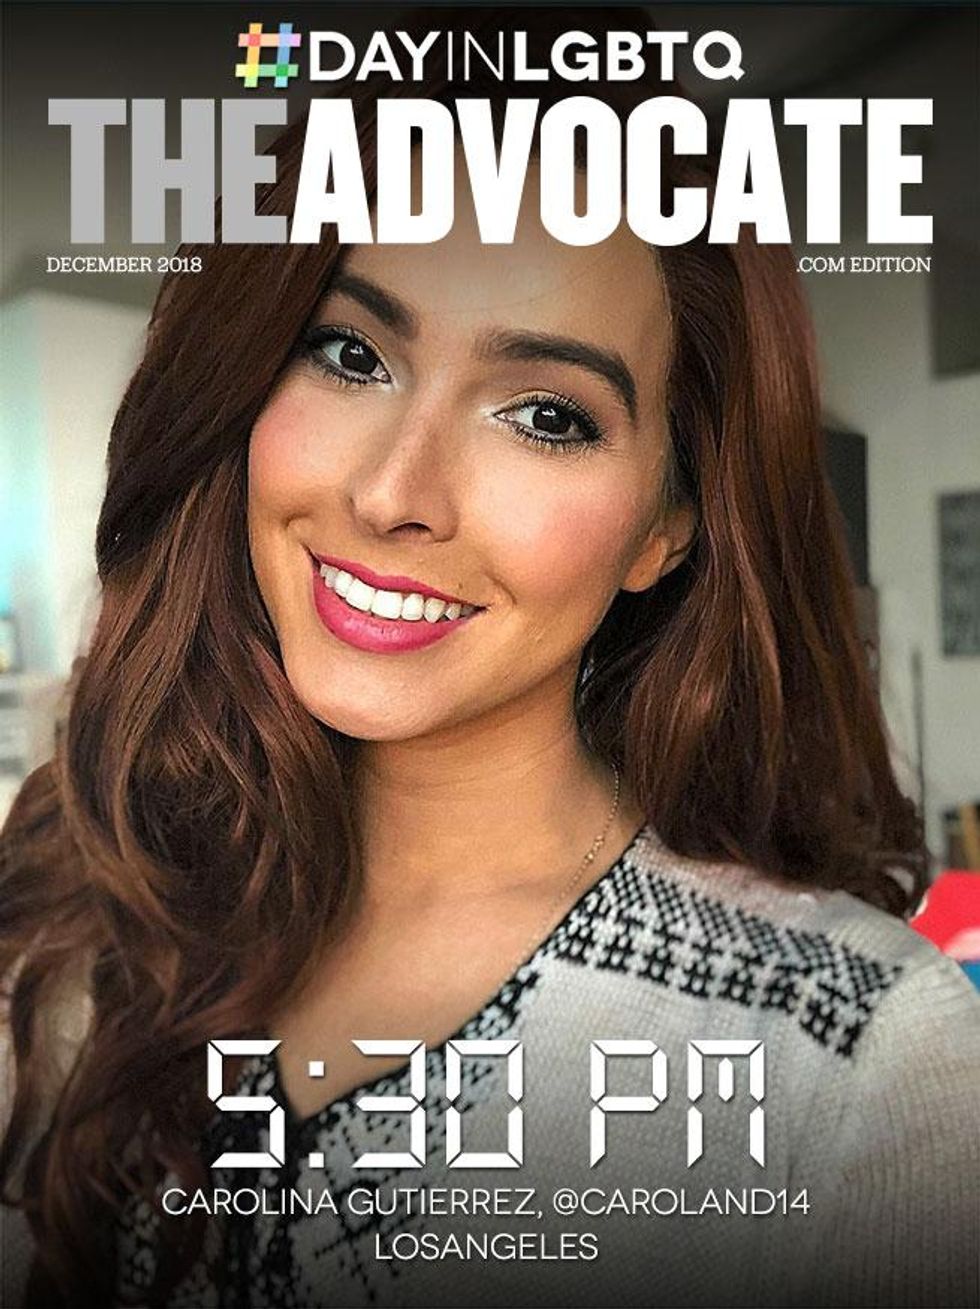 Pm-04-50-caroland14-theadvocate-2018-dayinlgbt-cover-template-655